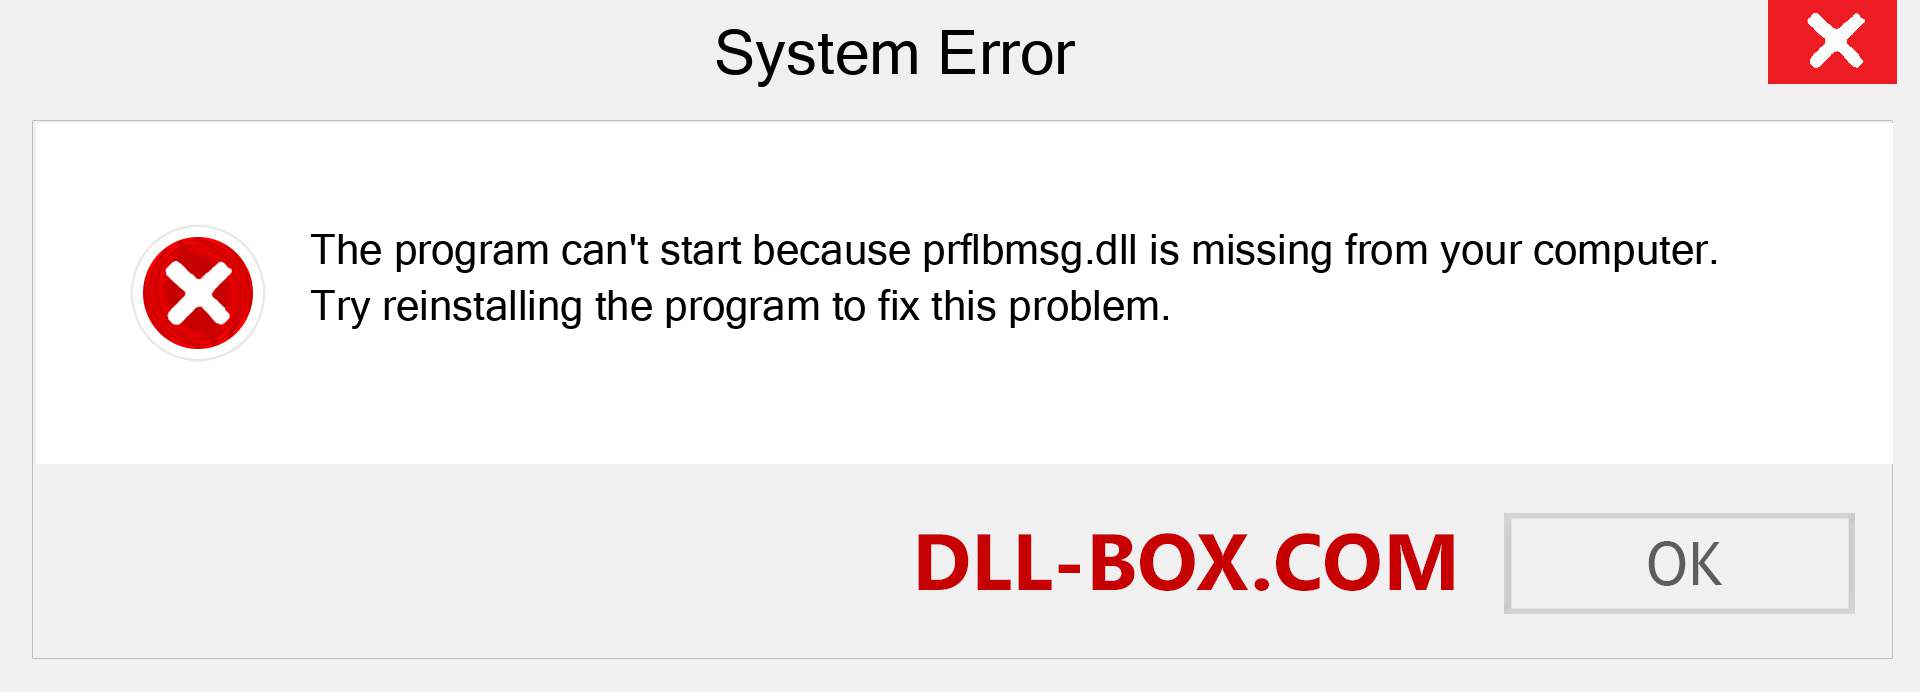  prflbmsg.dll file is missing?. Download for Windows 7, 8, 10 - Fix  prflbmsg dll Missing Error on Windows, photos, images